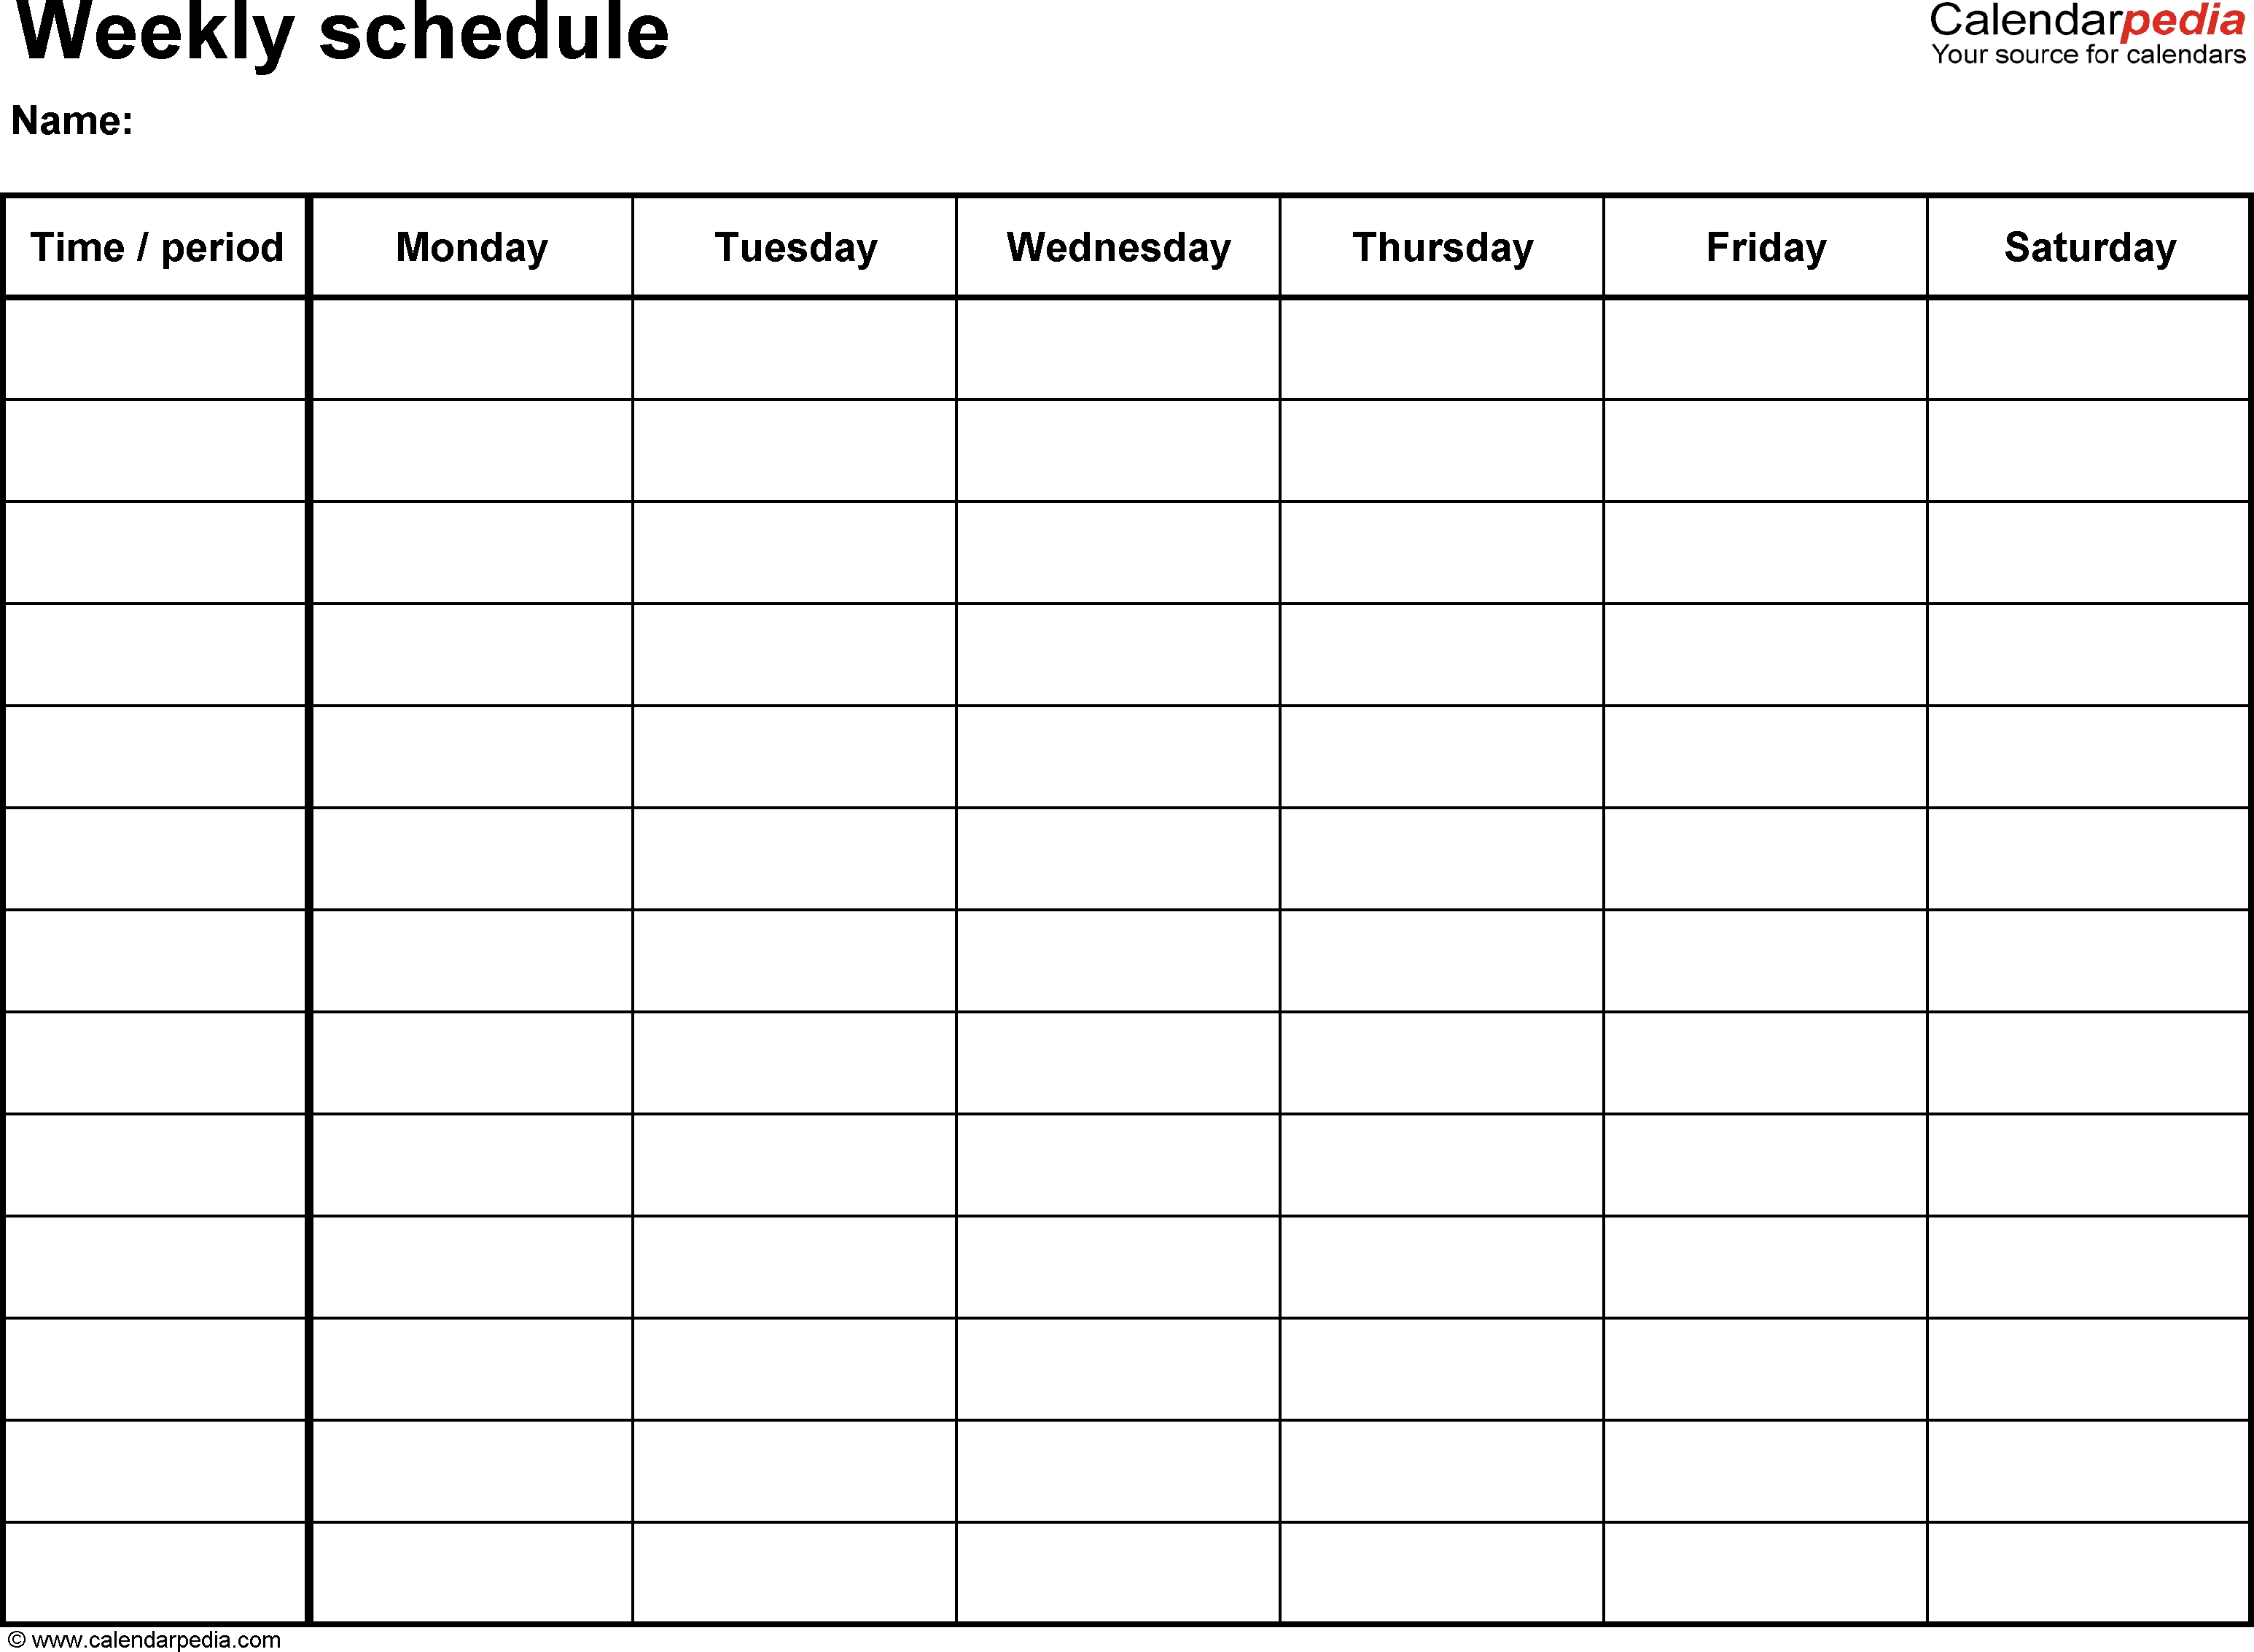 Free Weekly Schedule Templates For Word - 18 Templates  Monday To Friday Planner